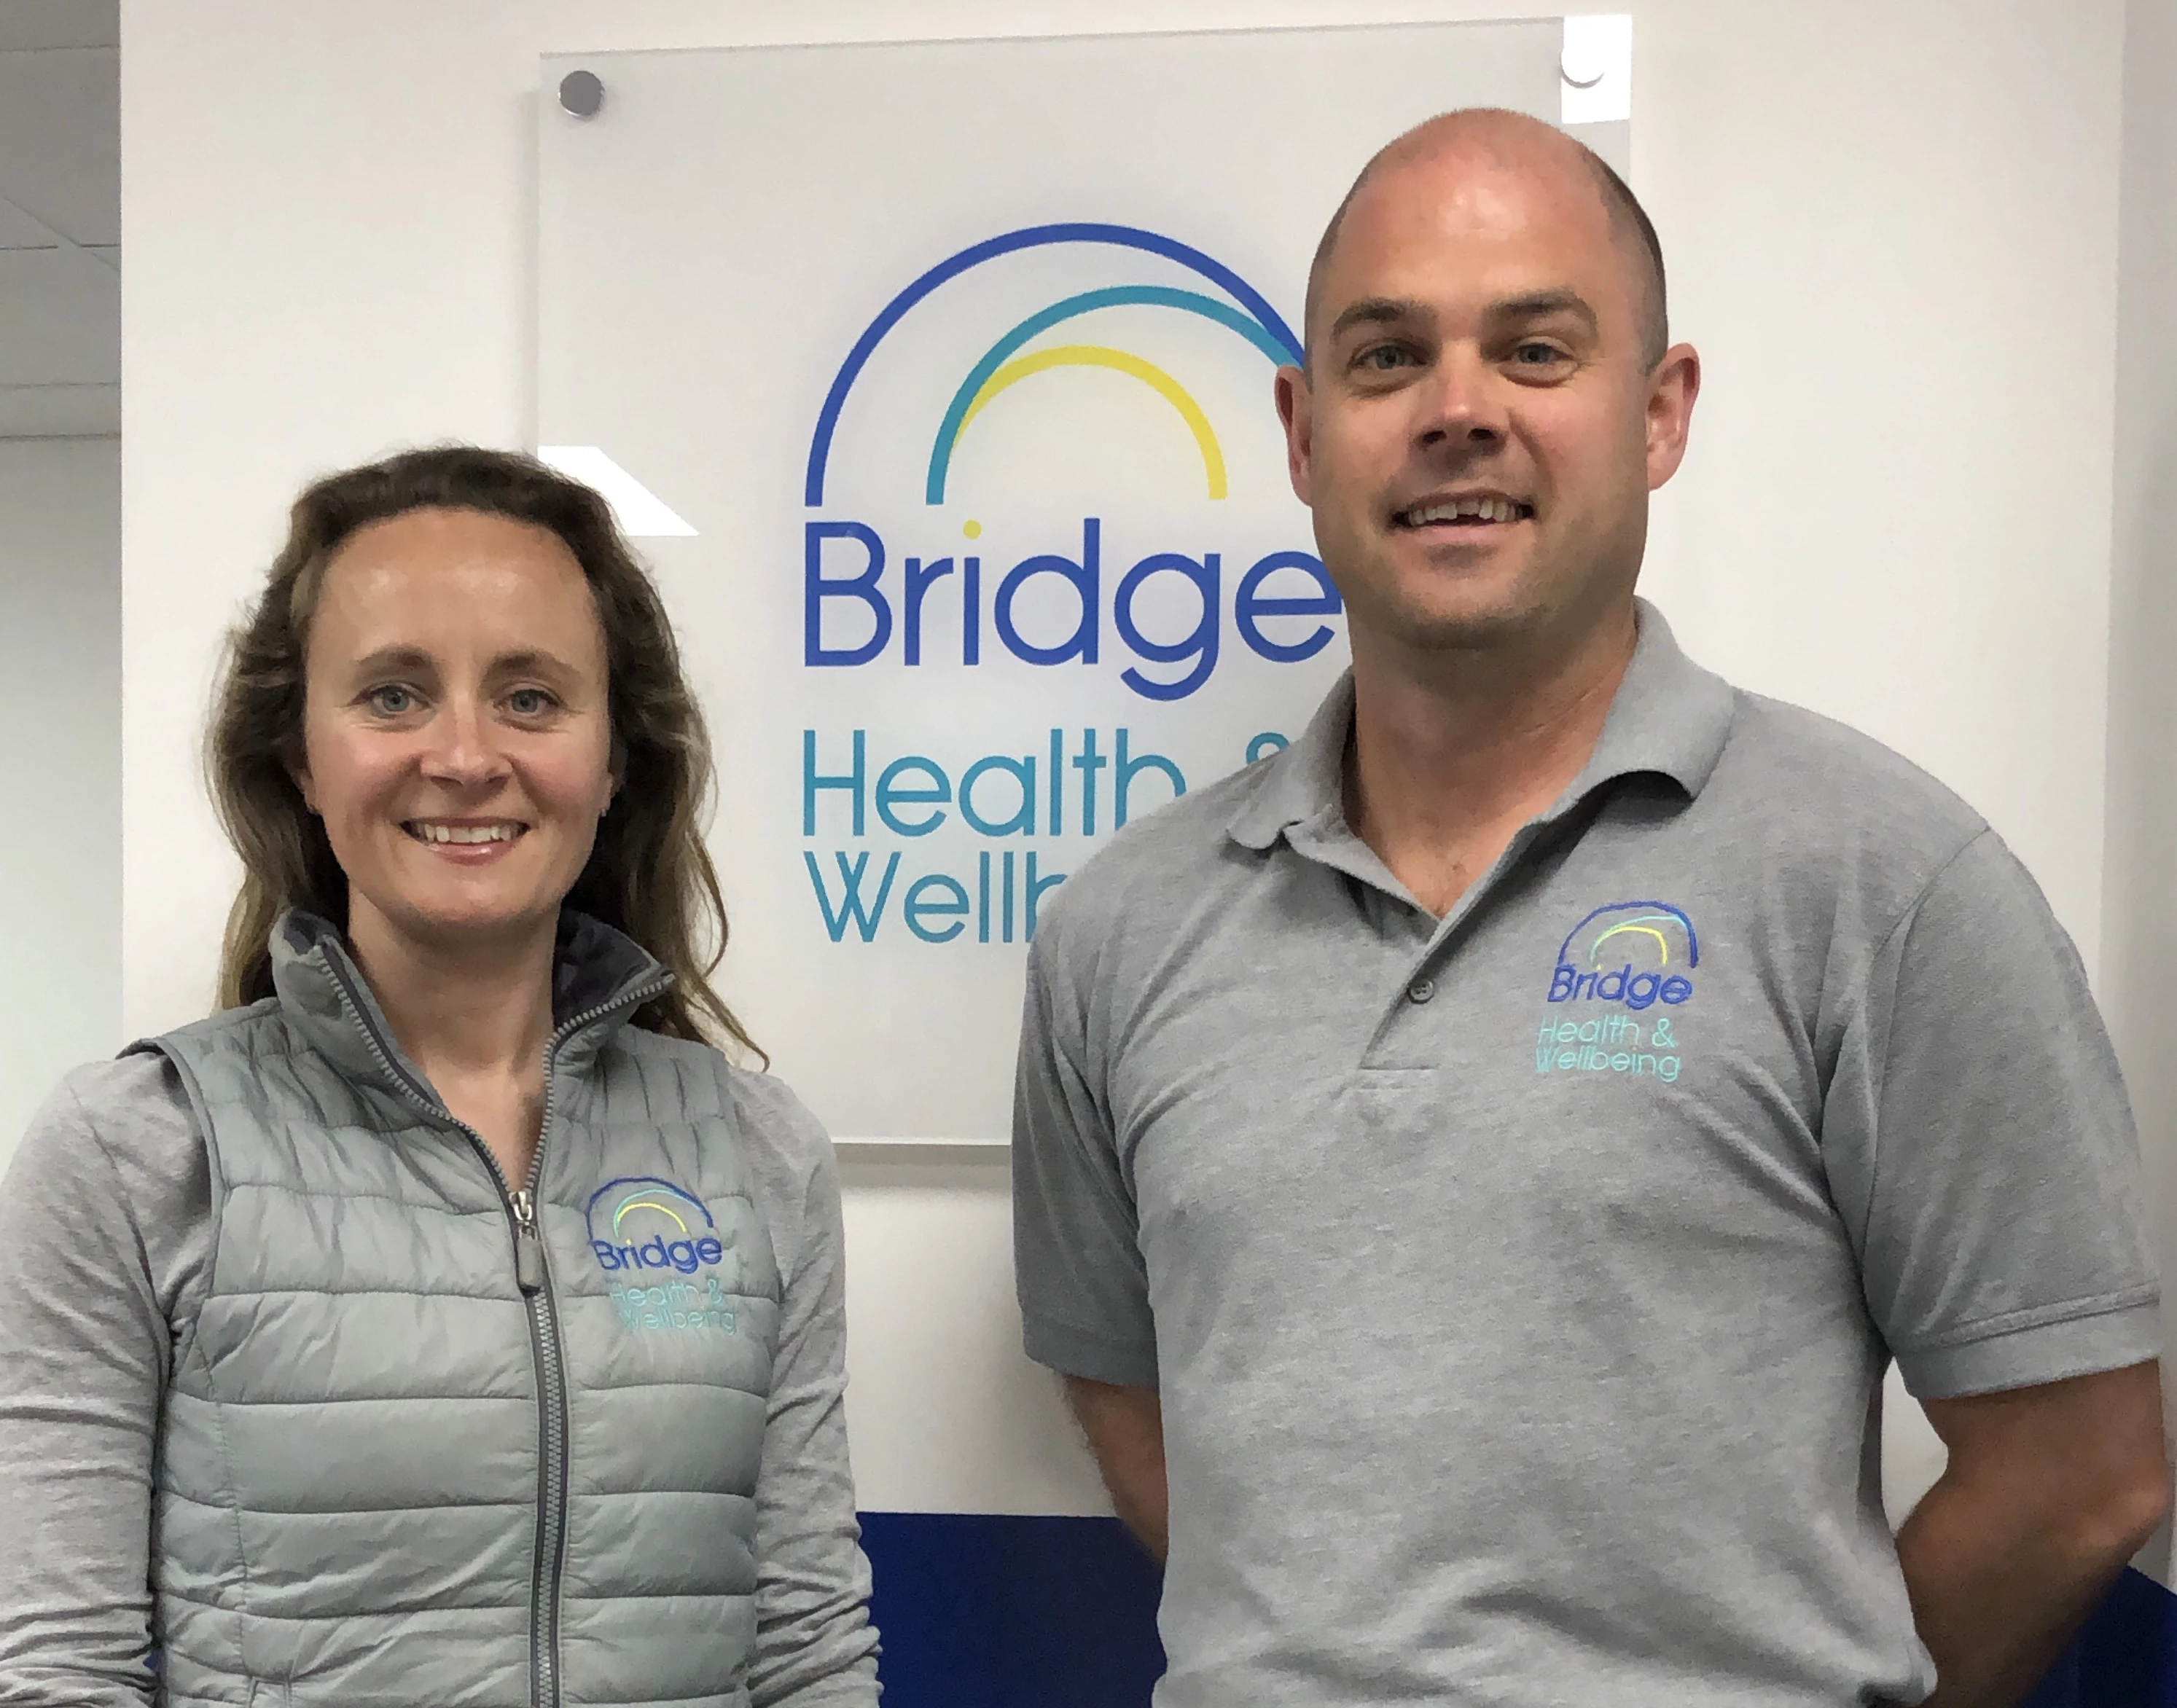 Louise & Paul O'Connell, Bridge Health & Wellbeing